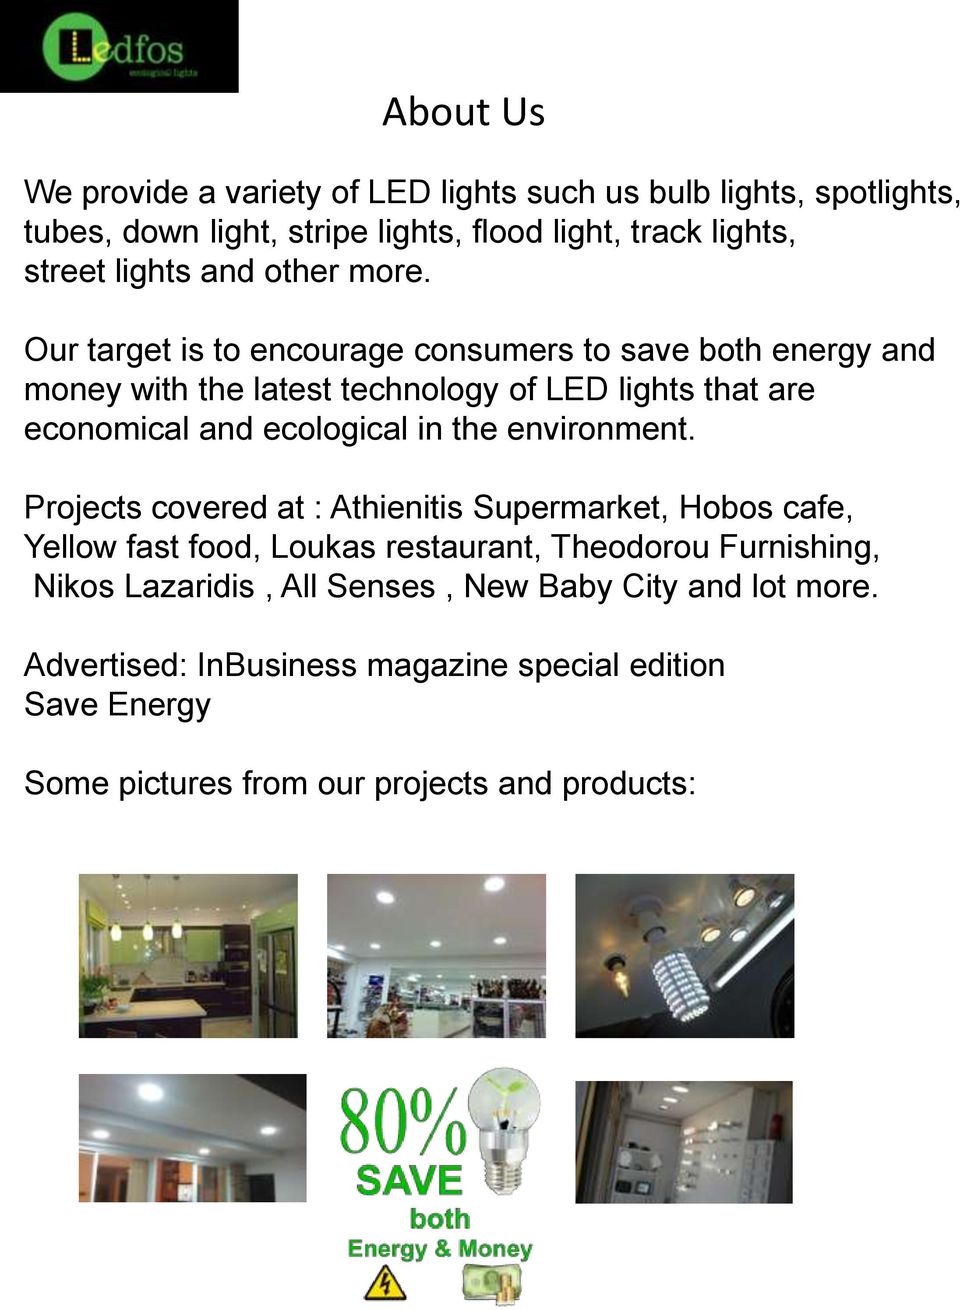 Our target is to encourage consumers to save both energy and money with the latest technology of LED lights that are economical and ecological in the